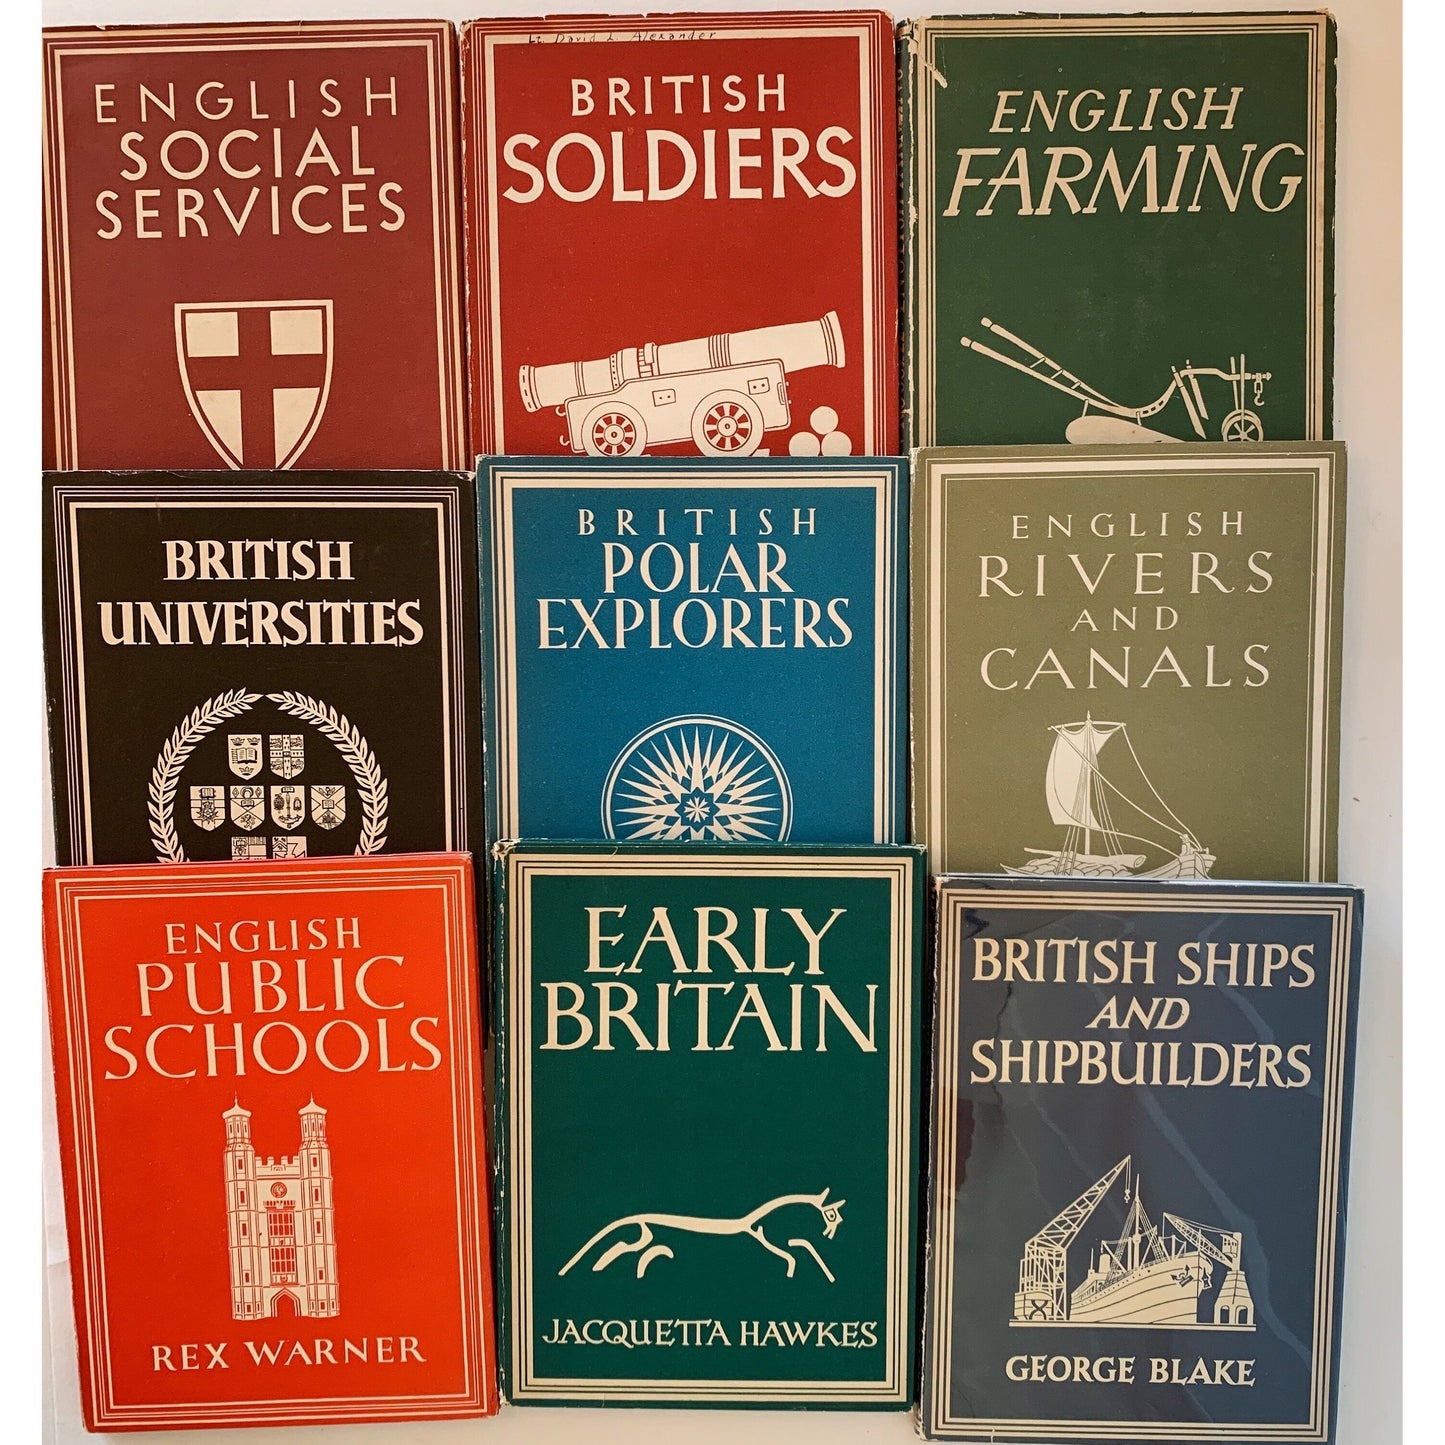 Britain in Pictures Set, 25 Books, Vintage Anglophile Shelf Styling